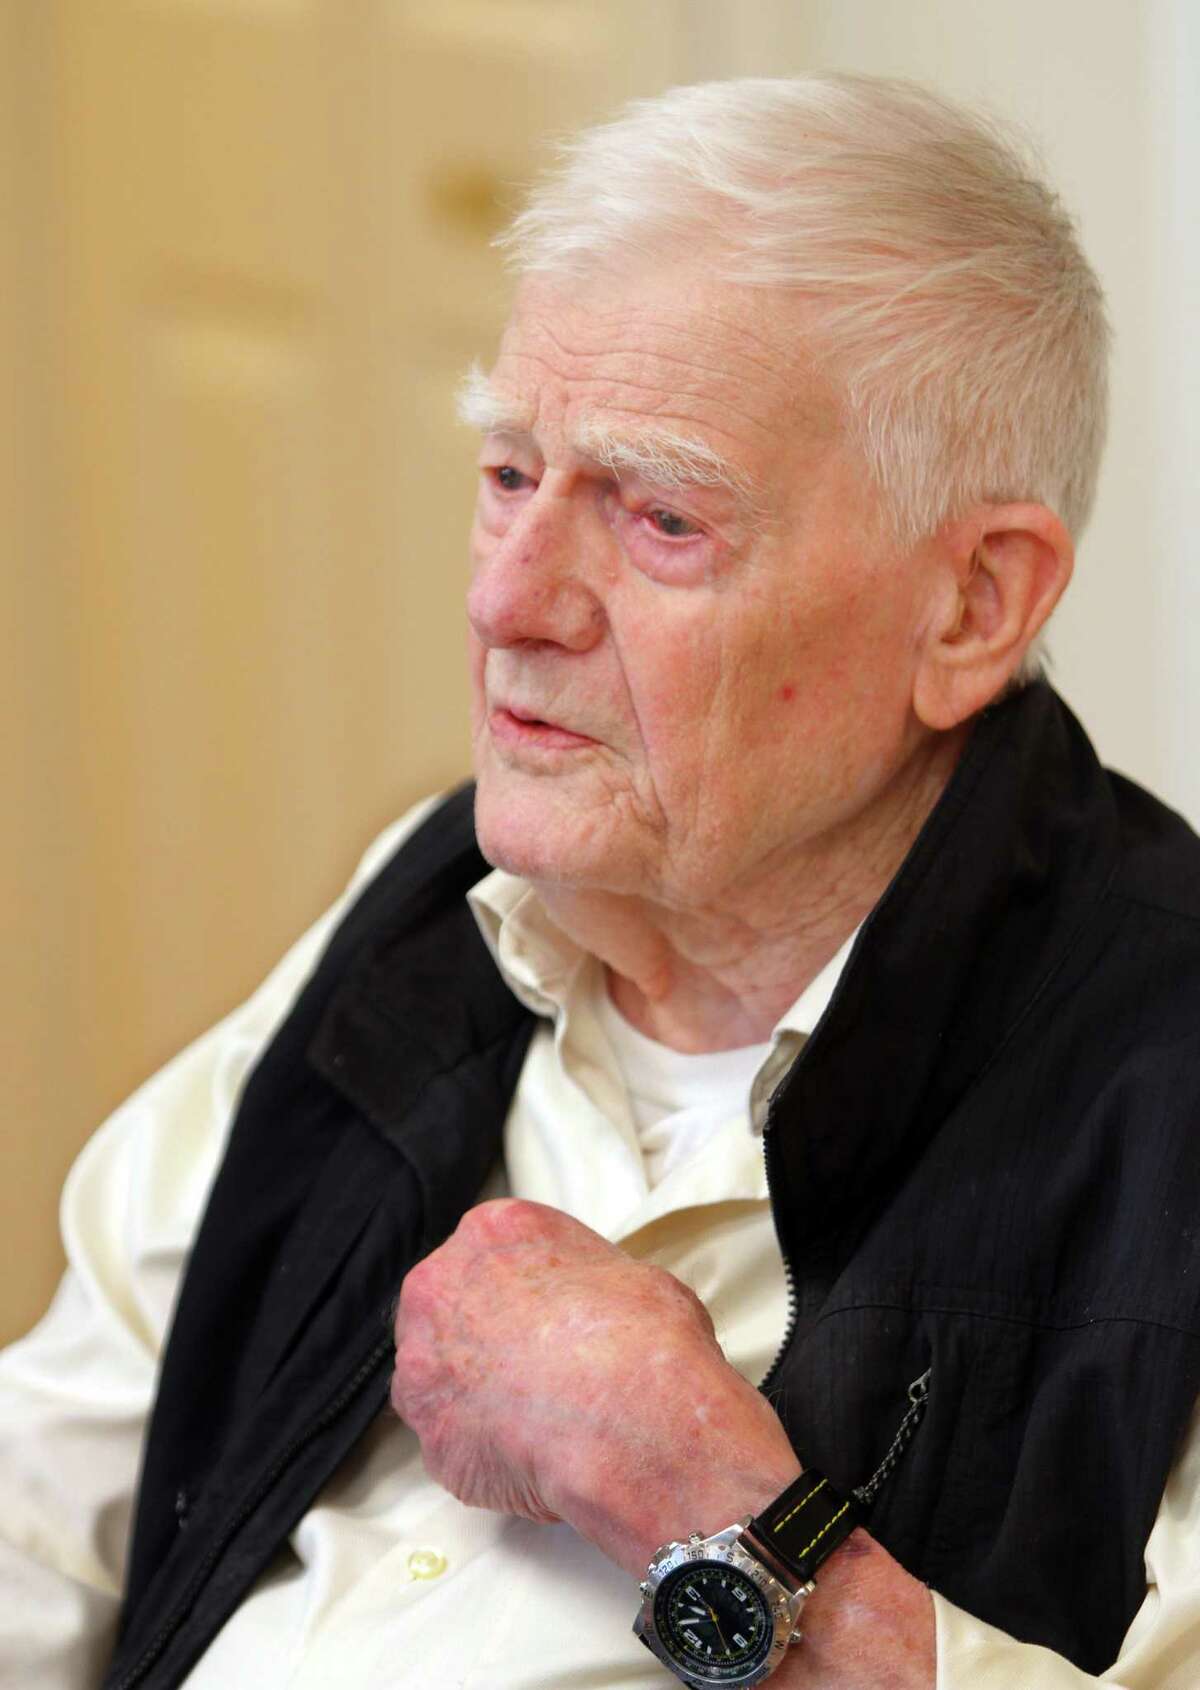 George Ongley, a WWII veteran who served in the US Navy, joined up with several other WWII vets who are residents at Whitney Center, to speak about their time in the military ahead of Veterans Day in Hamden, Conn., on Wednesday November 9, 2022.